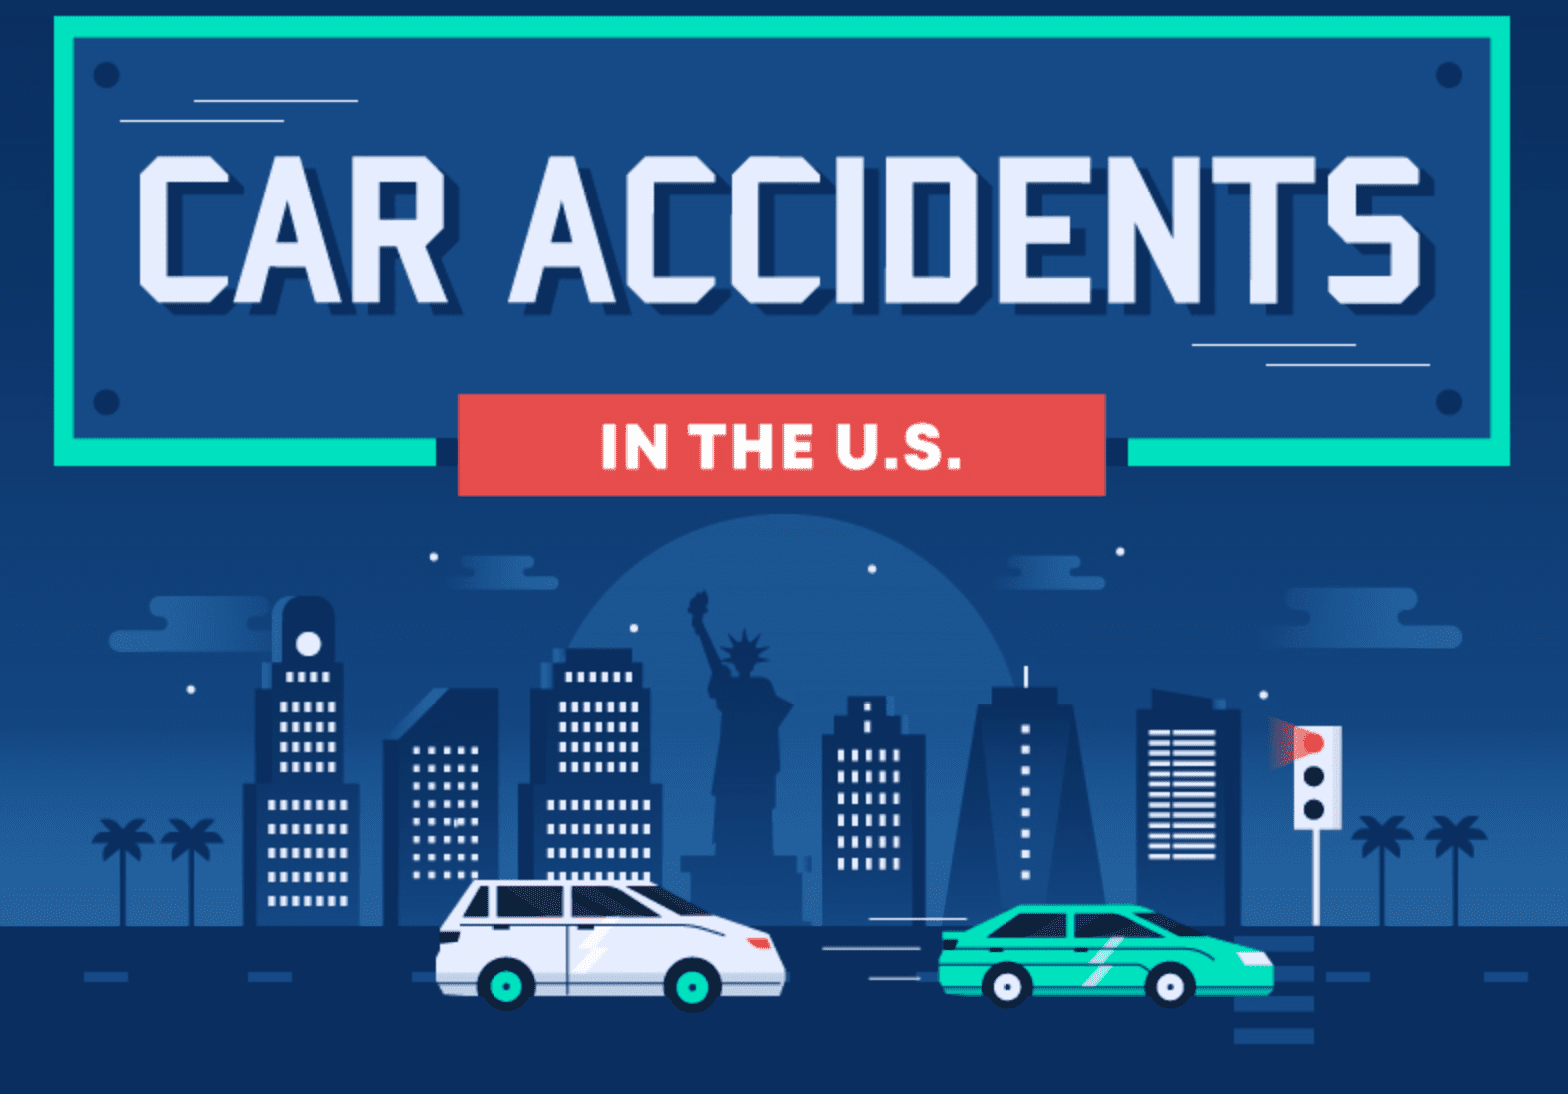 Car accidents in the U.S.; graphic courtesy of the author.